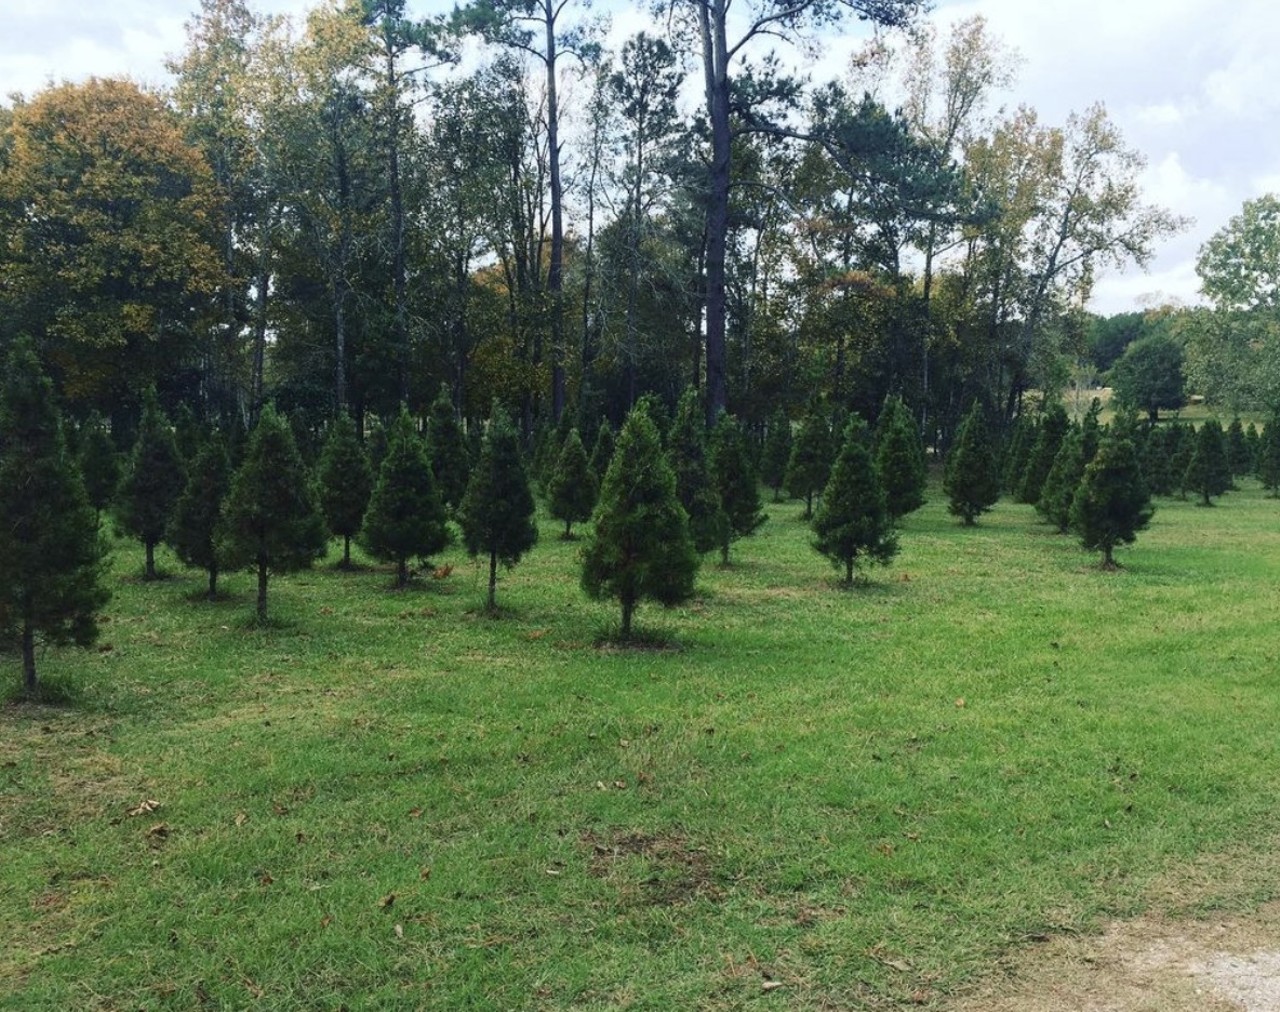 Double Creek Christmas Tree Farm
1288 Oakdale Loop, Livingston, (936) 967-3912, doublecreektreefarm.com
Located north of Houston in Livingston, this Christmas tree farm is open on weekends Nov. 26-Dec. 12. In addition to cut-your-own trees, visitors can enjoy family-friendly activities including hayrides, a hay jump, a playhouse, bounce house, fire pit and more.
Photo via Instagram / doublecreekfarm2021